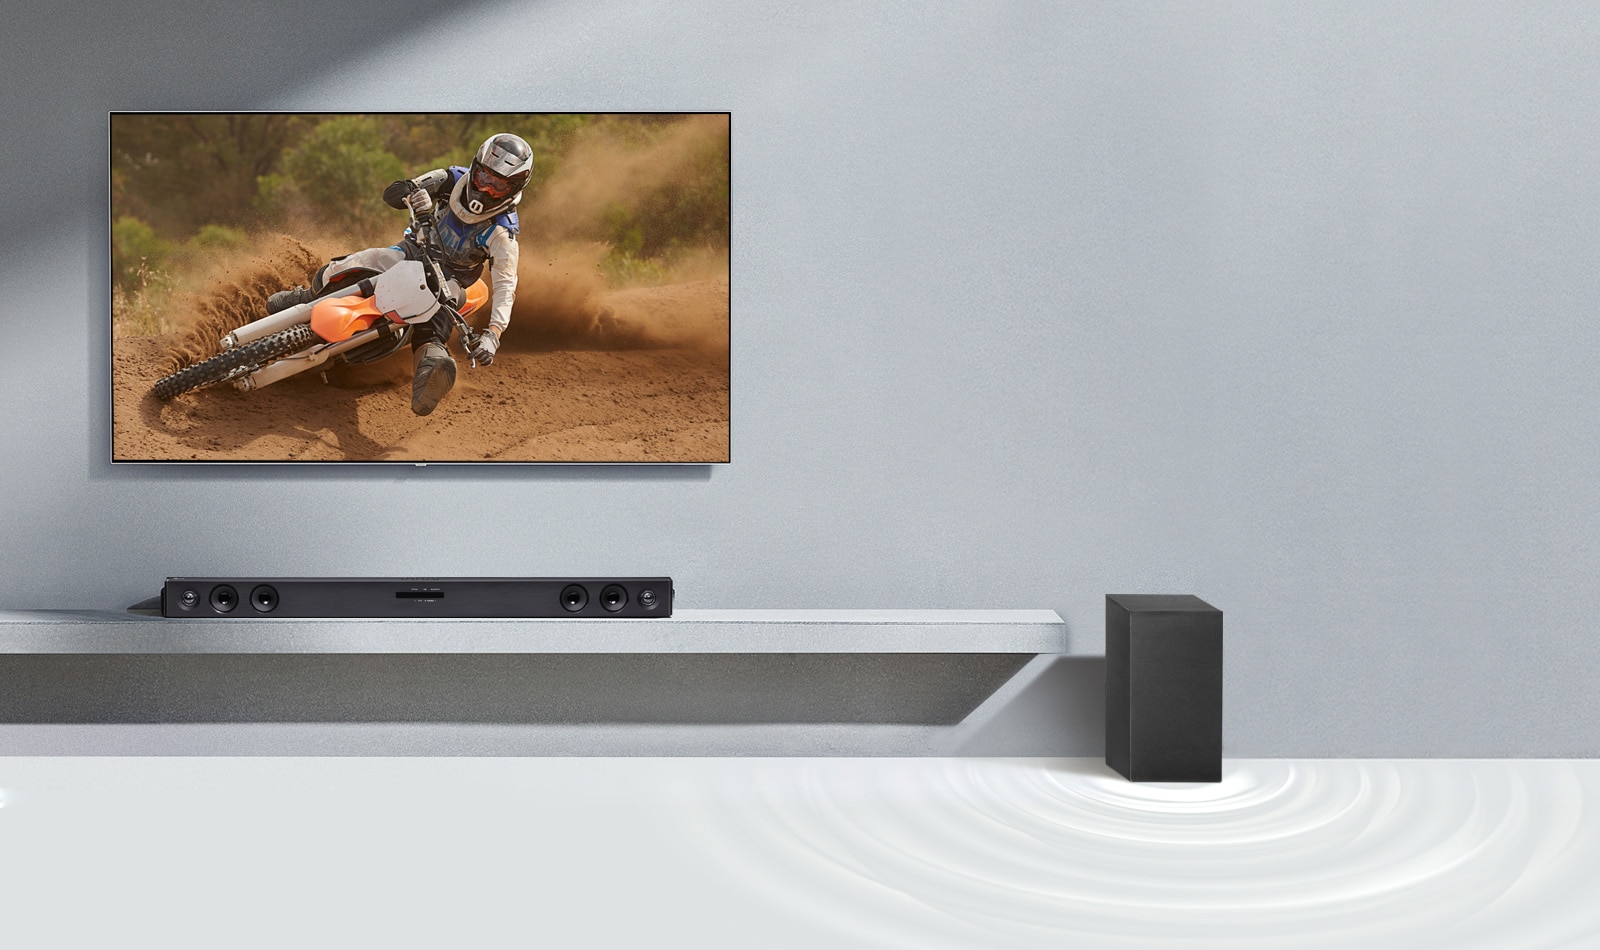 LG sound bar SQC2 and LG TV are placed together in the living room. The subwoofer is placed next to the sound bar. The TV is on, displaying a mortorcycle image.